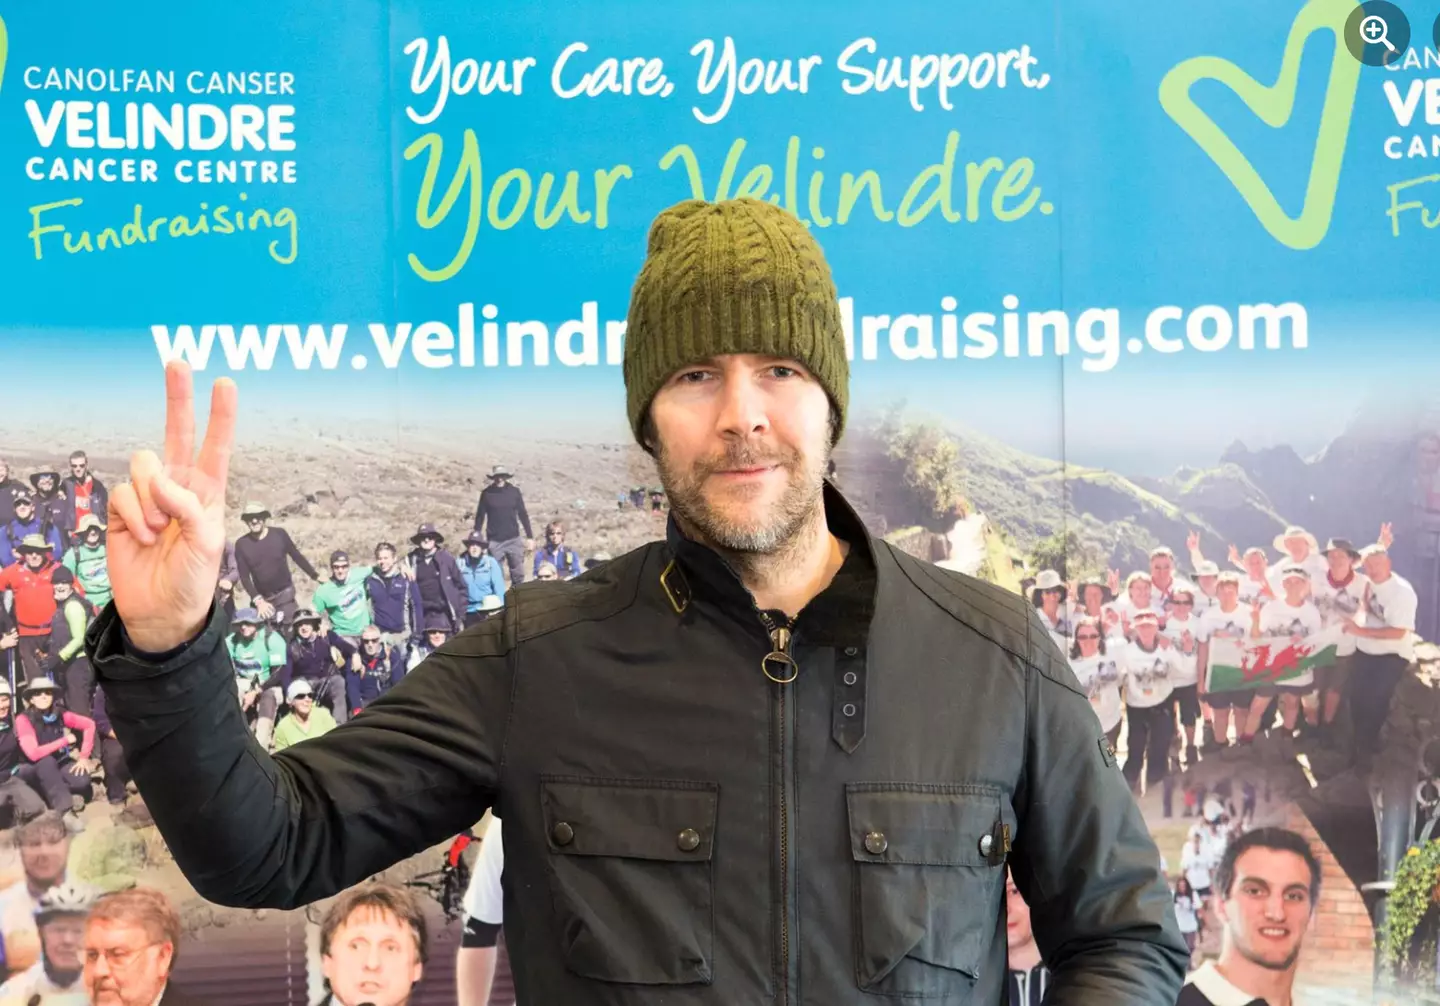 Gilbert has long been a supporter of the Velindre Cancer Centre.